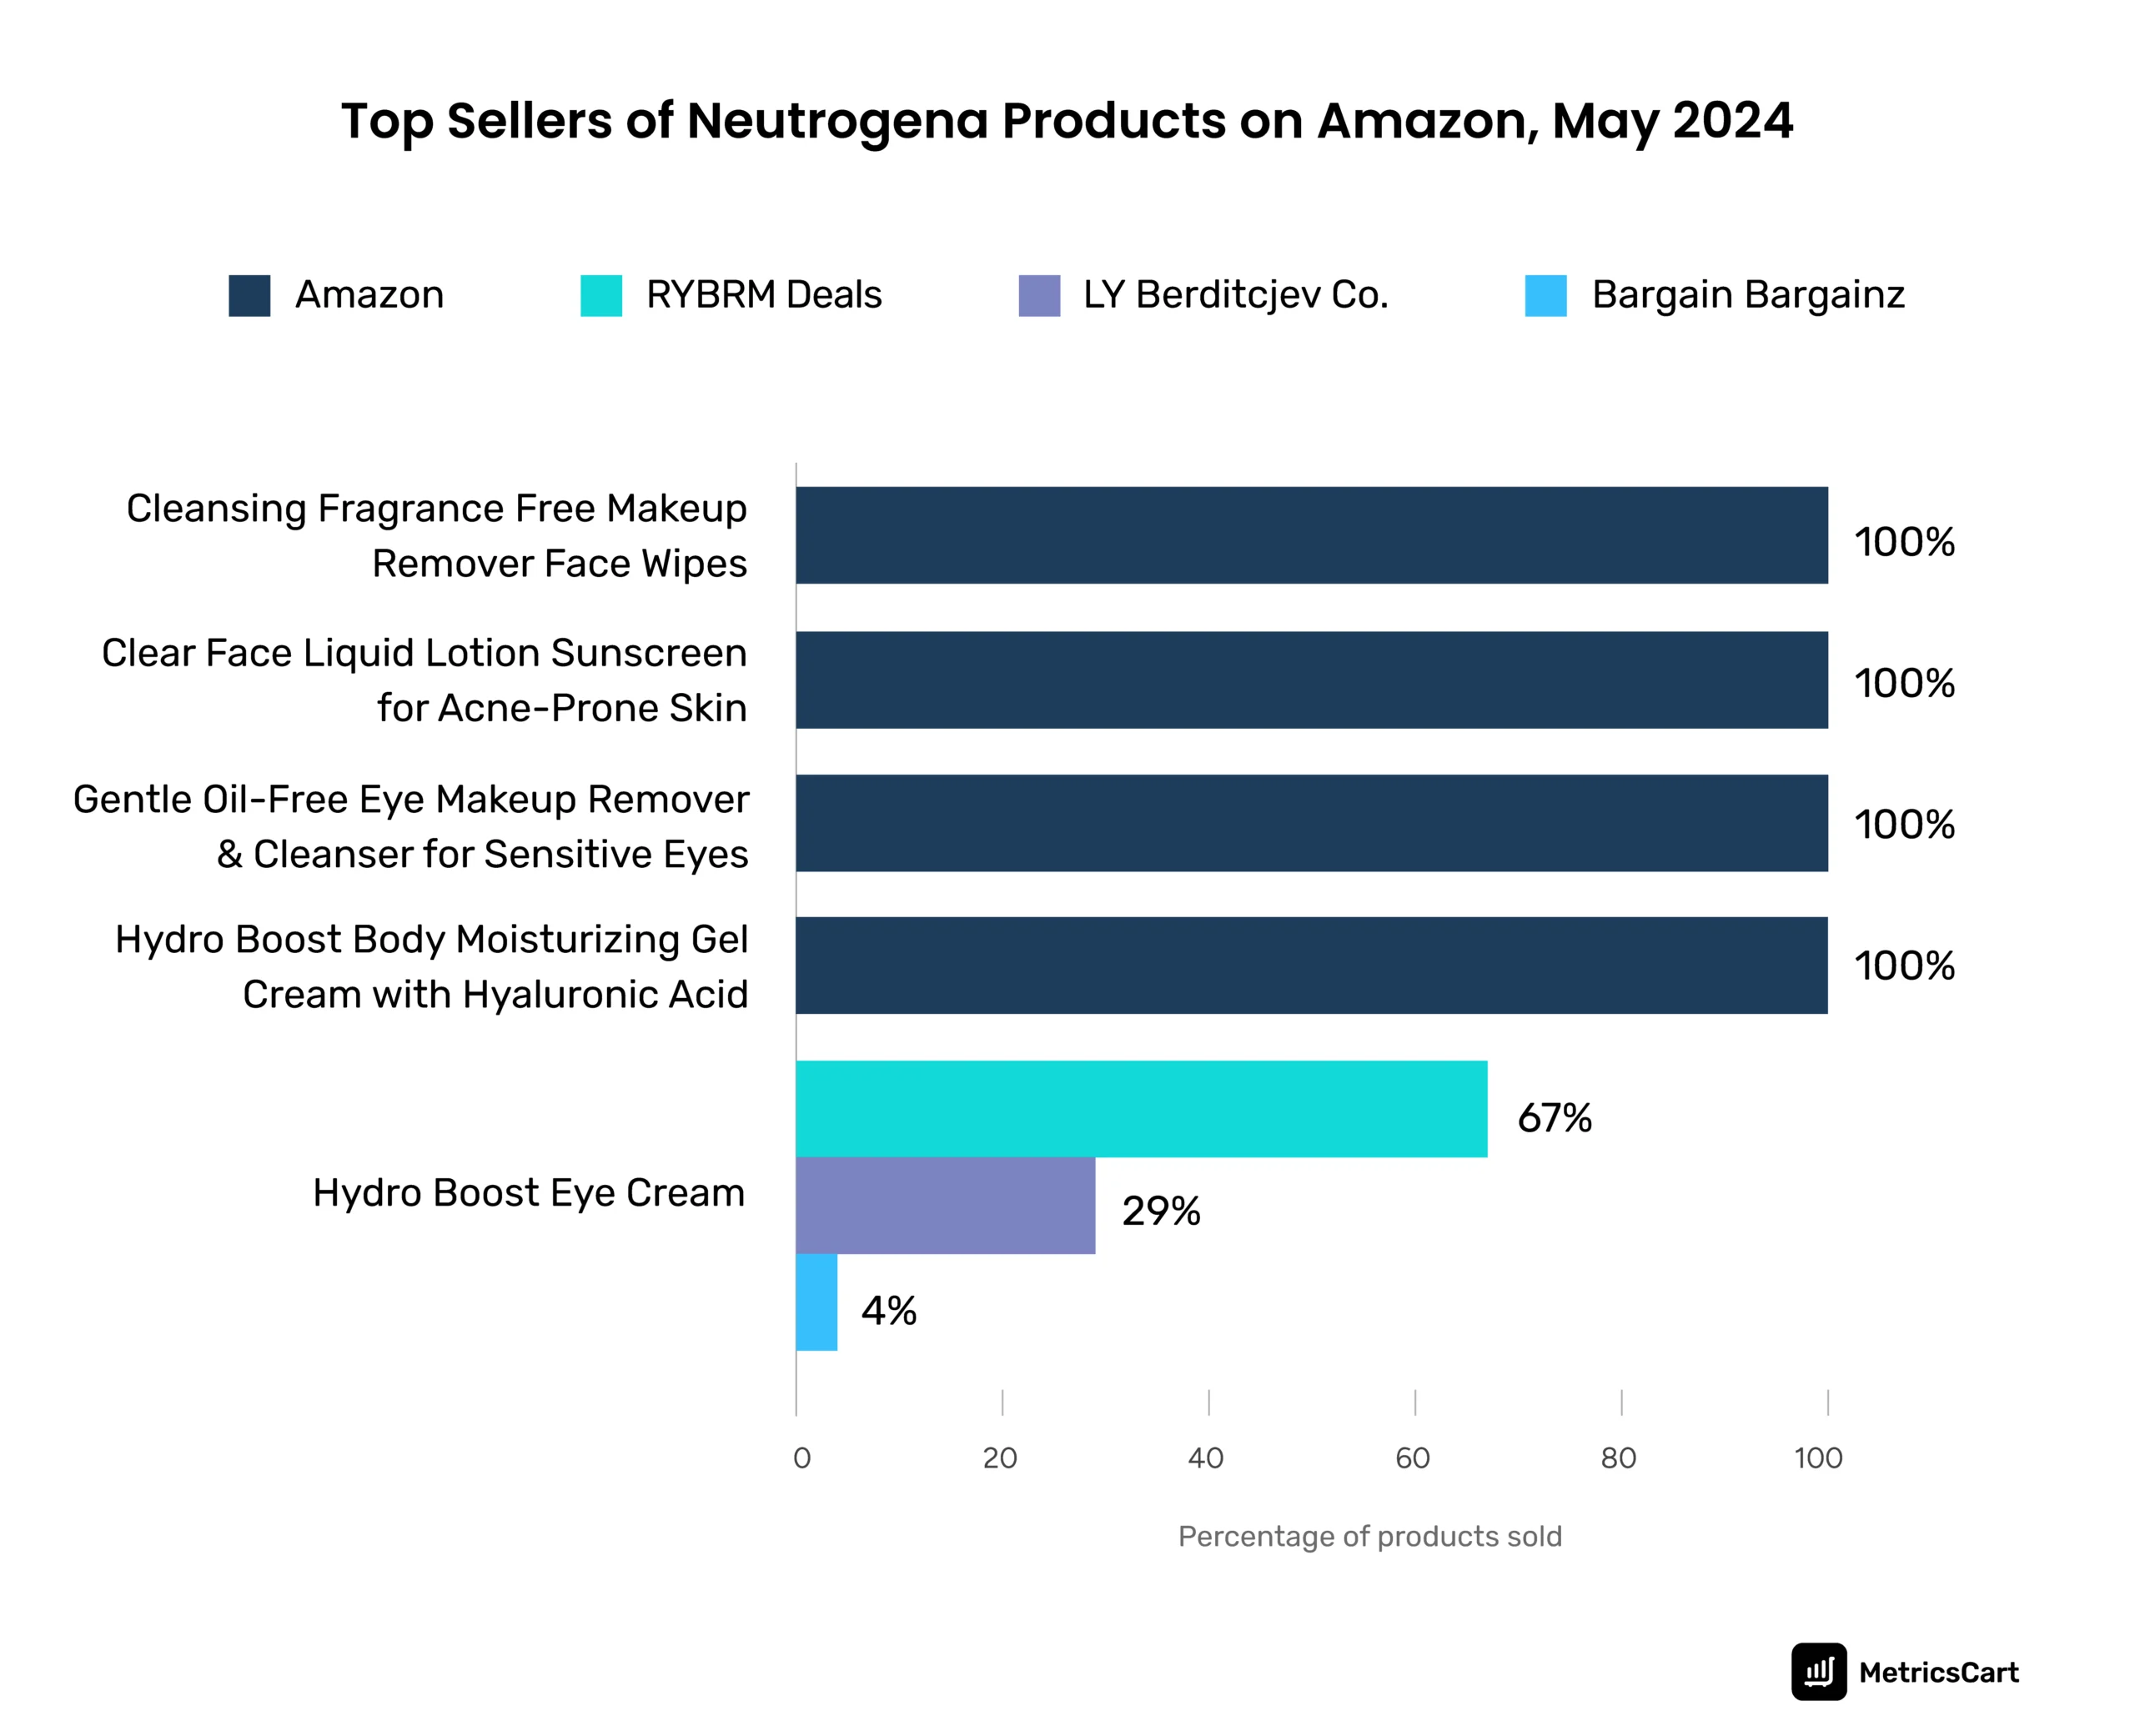  top sellers of Neutrogena products on Amazon for May 2024